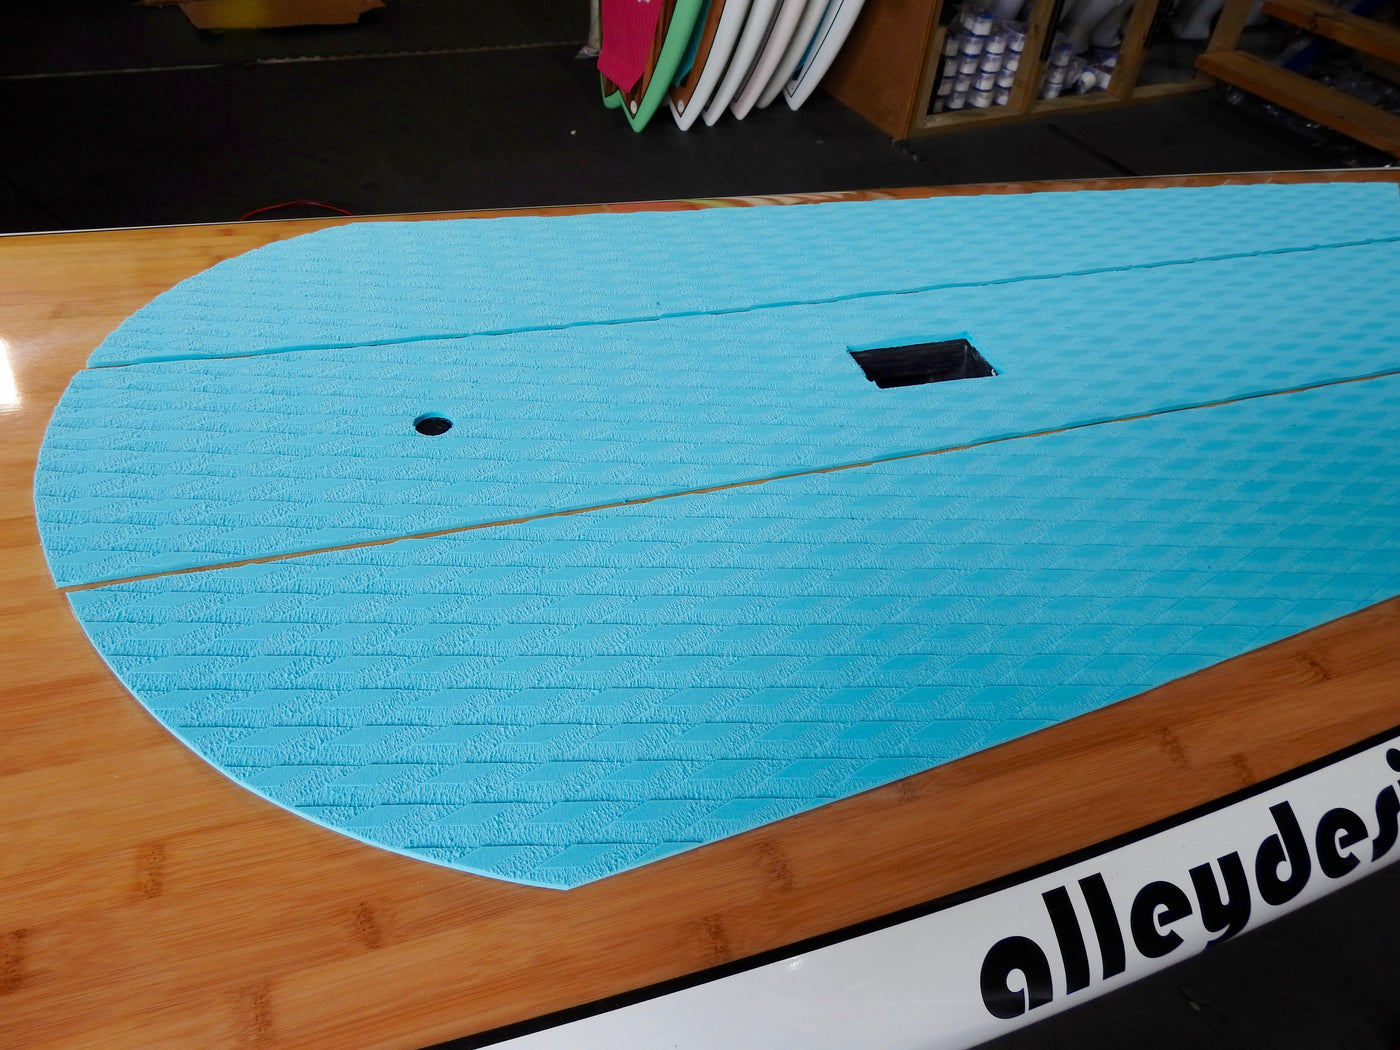 8’2” x 30” Galaxy Bounce Bamboo & White Surf SUP - Alleydesigns  Pty Ltd                                             ABN: 44165571264